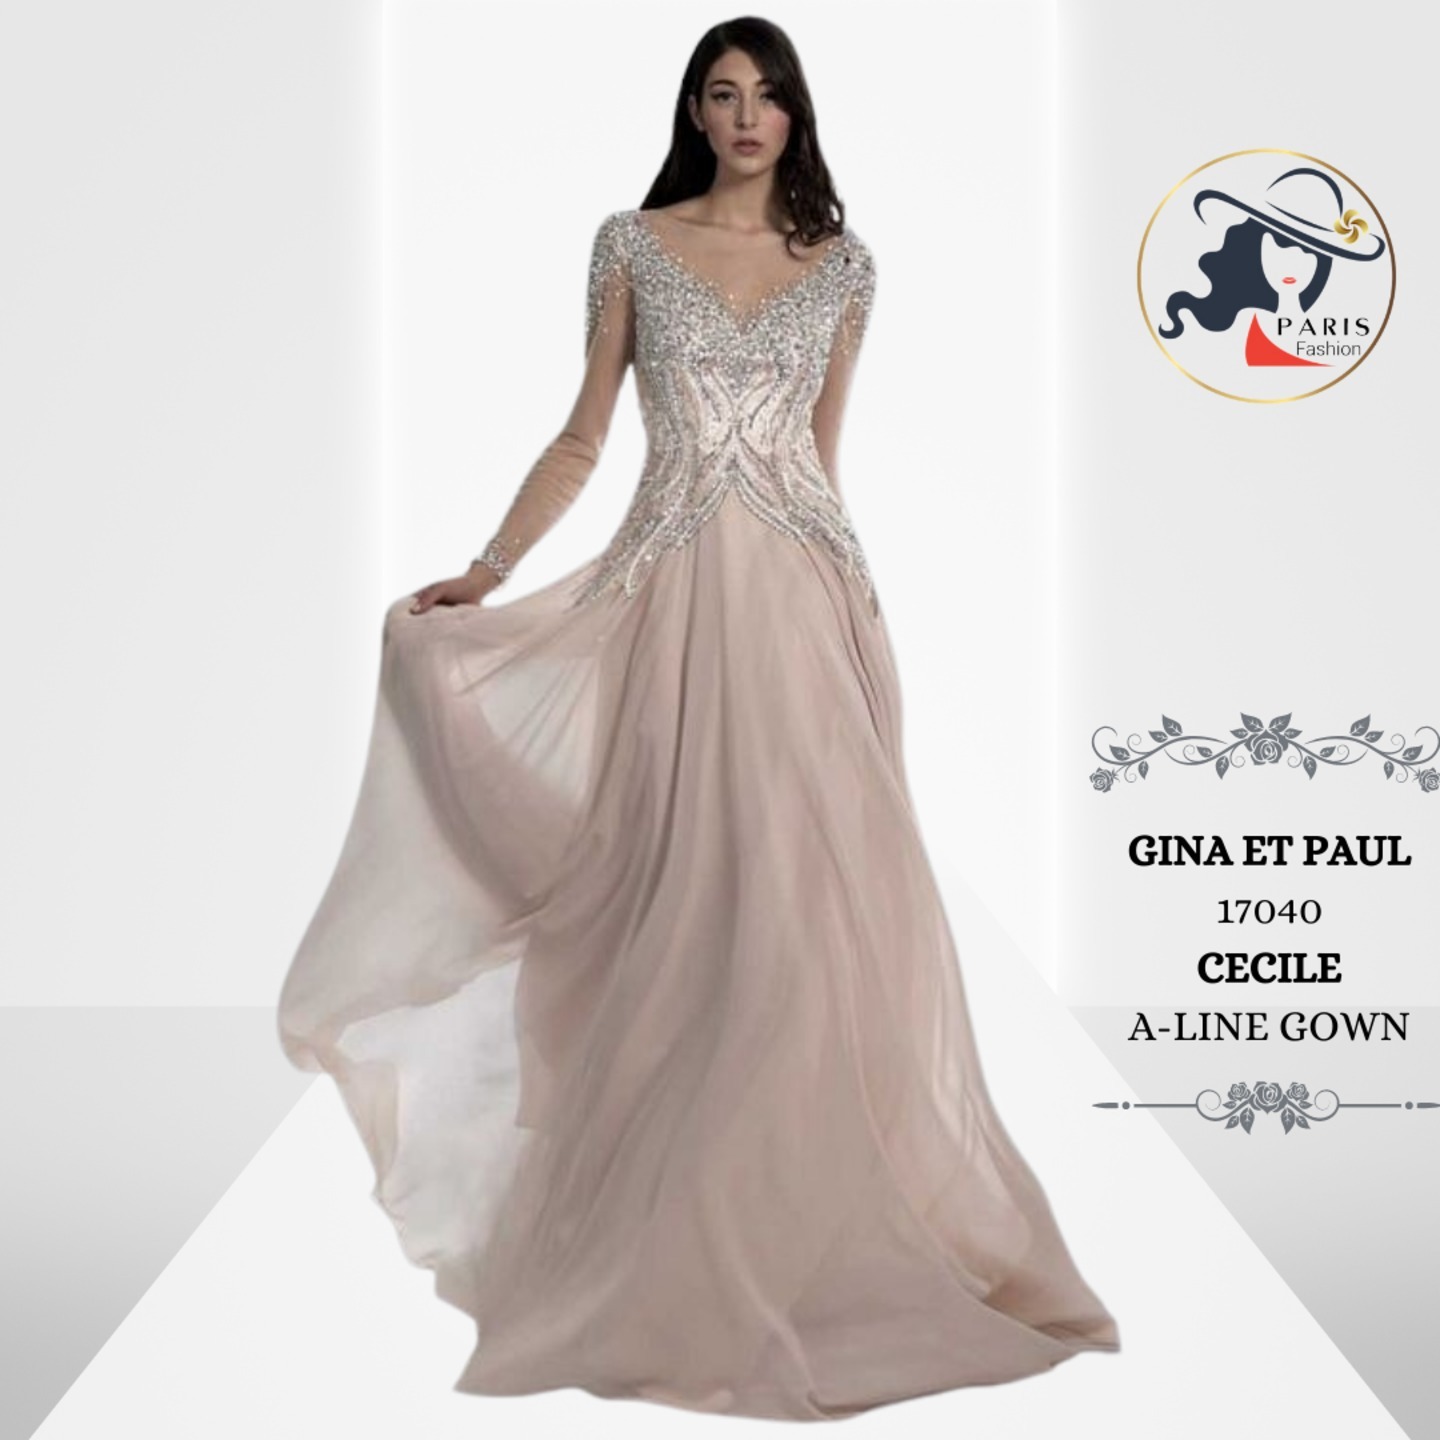 GINA ET PAUL 17040 CECILE A-LINE GOWN